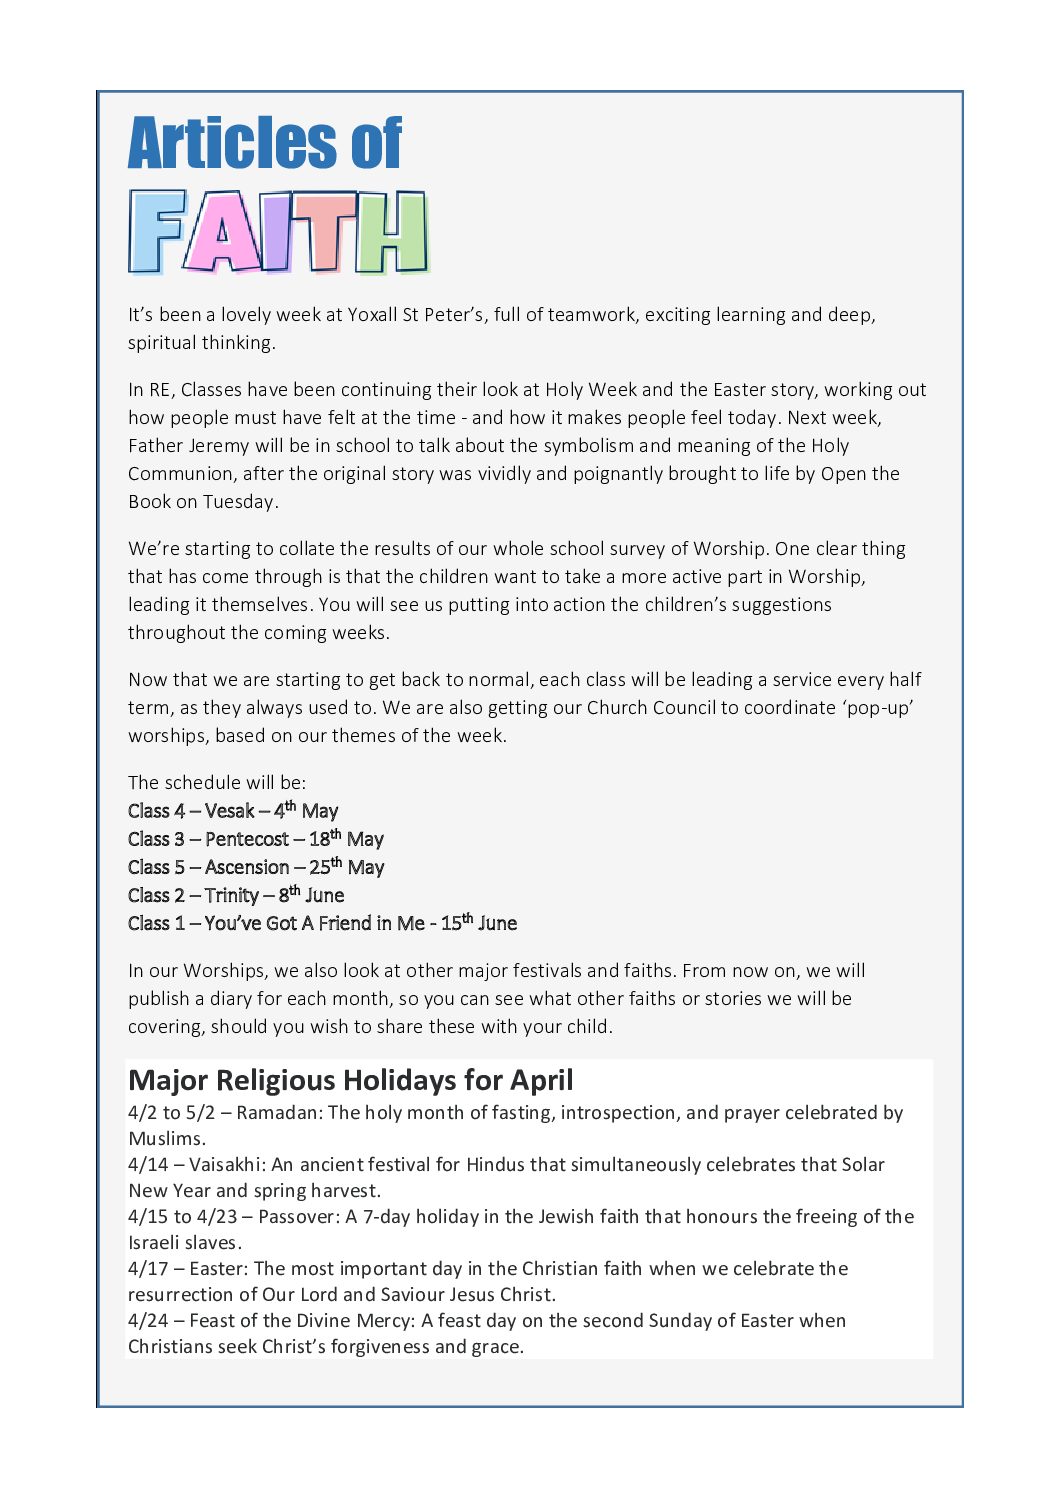 Articles of Faith – Friday, 25th March 2022